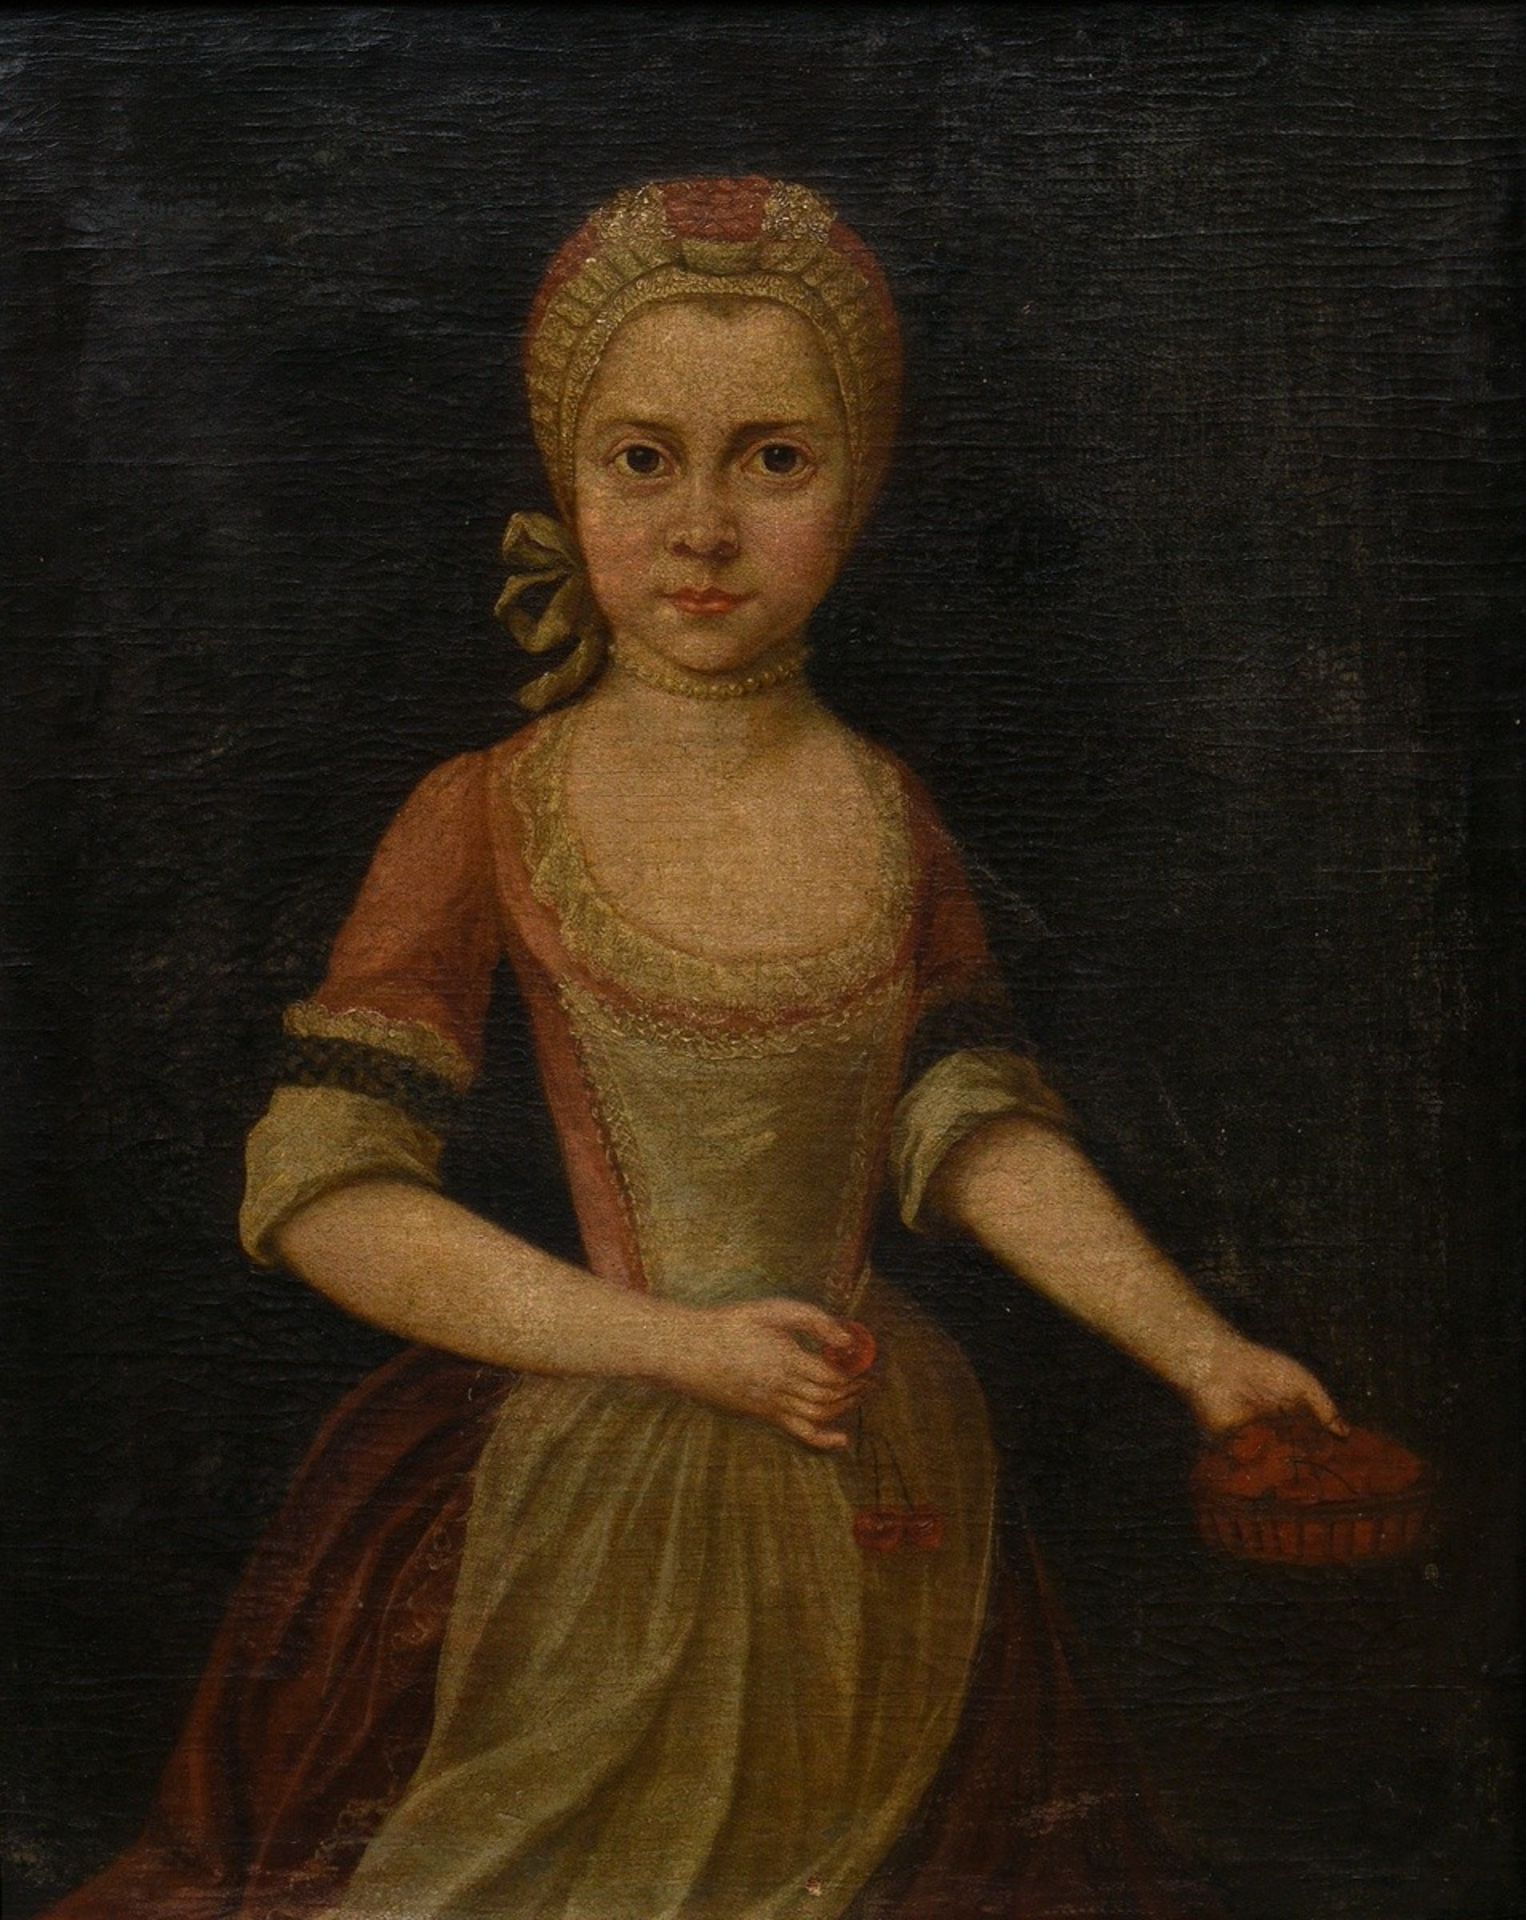 Unknown portraitist of the early 18th c. "Girl with Cherry Basket", oil/canvas, probably relined, 7